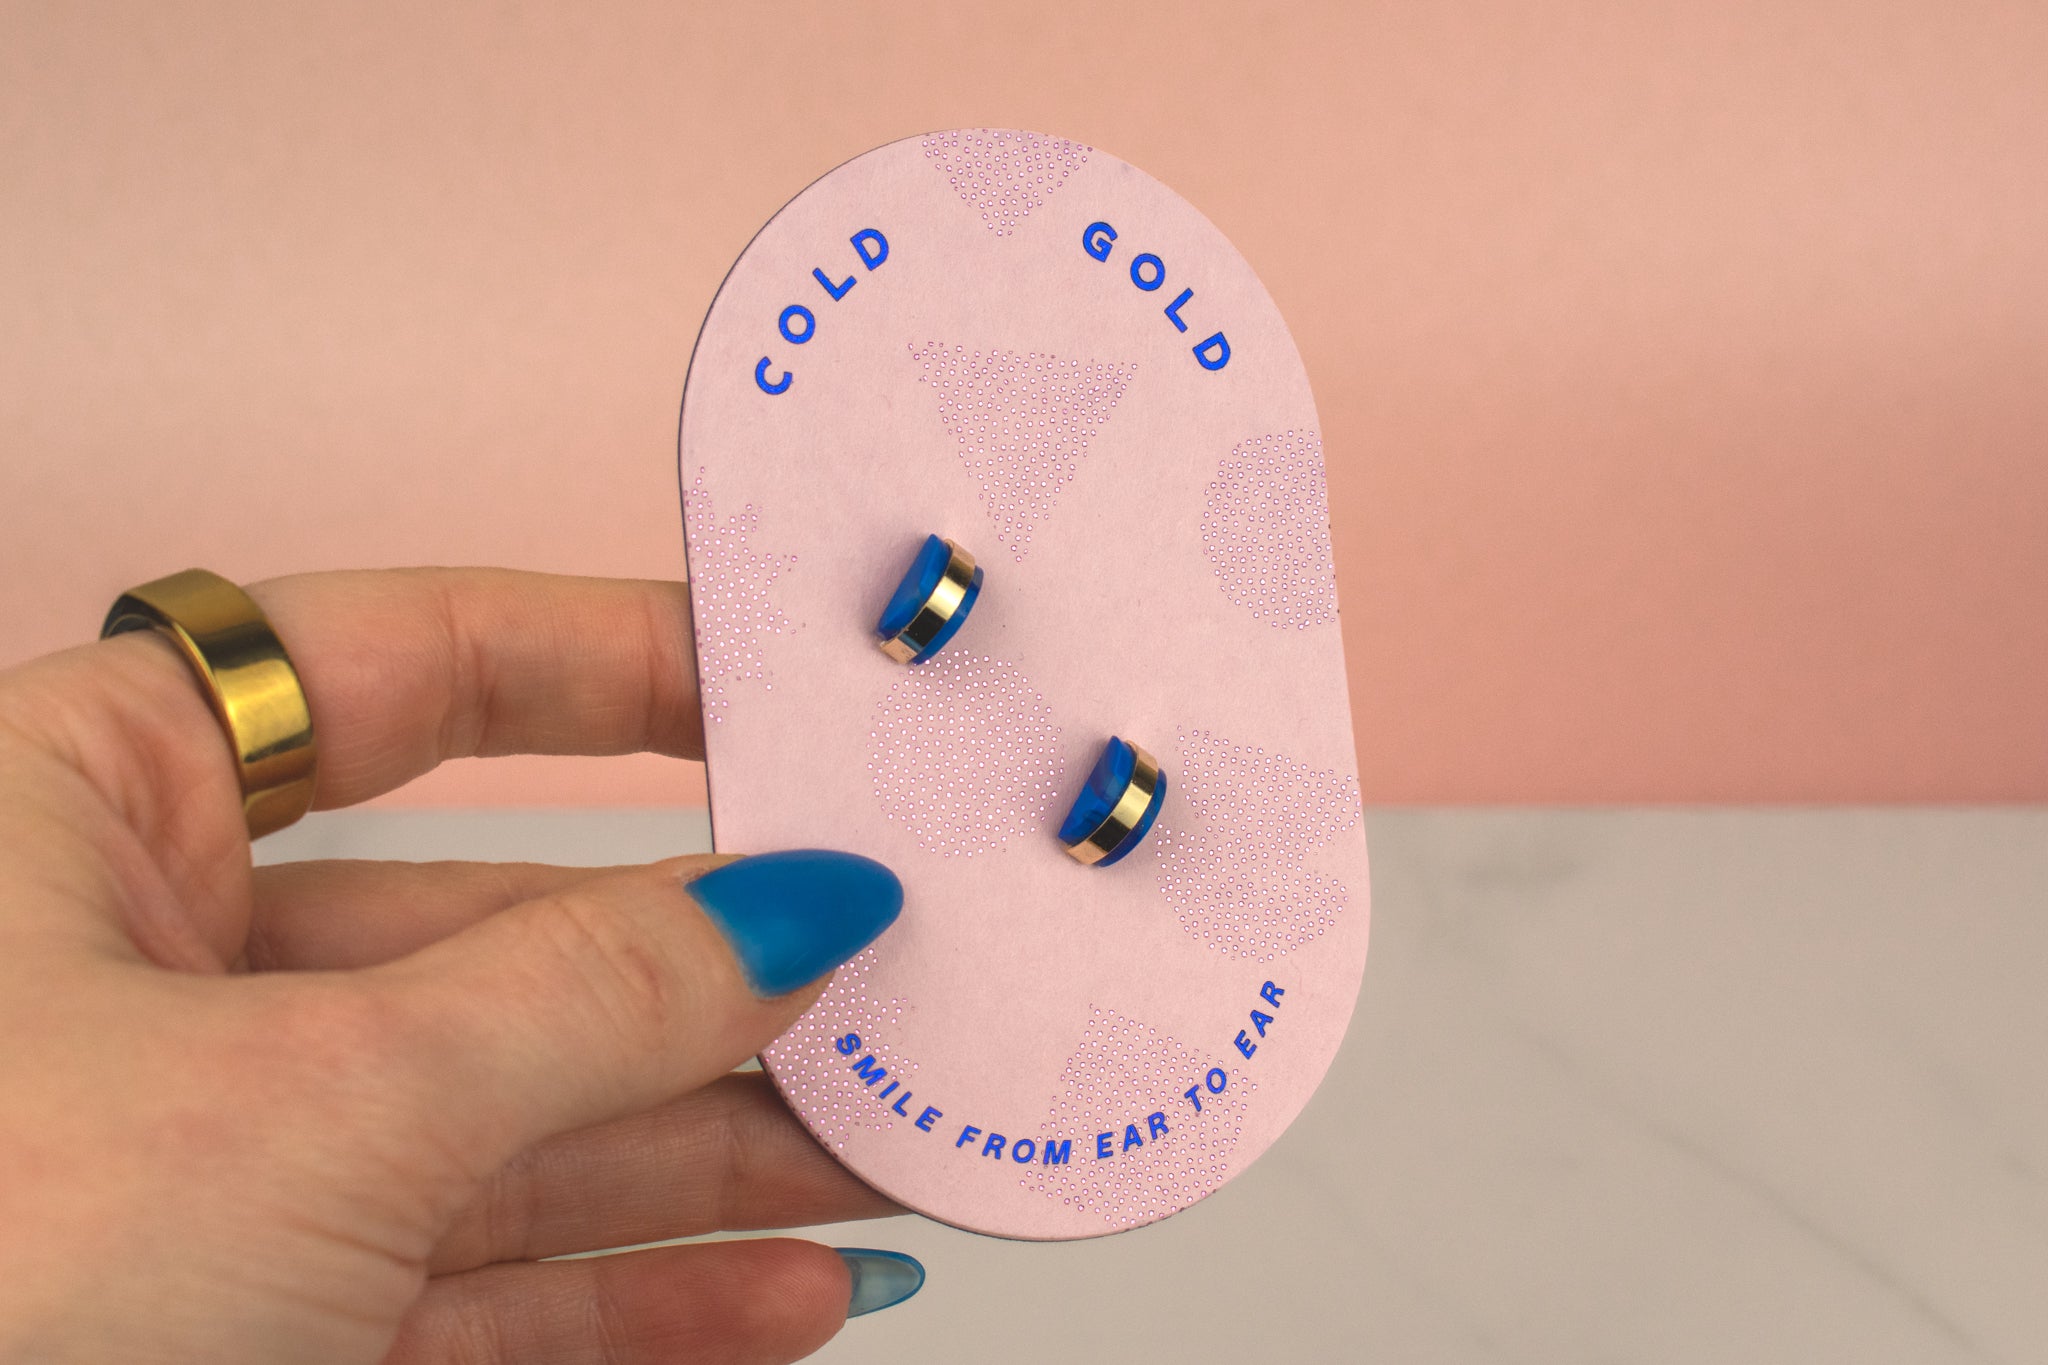 hand holding pink card displaying blue sapphire 14k gold earrings